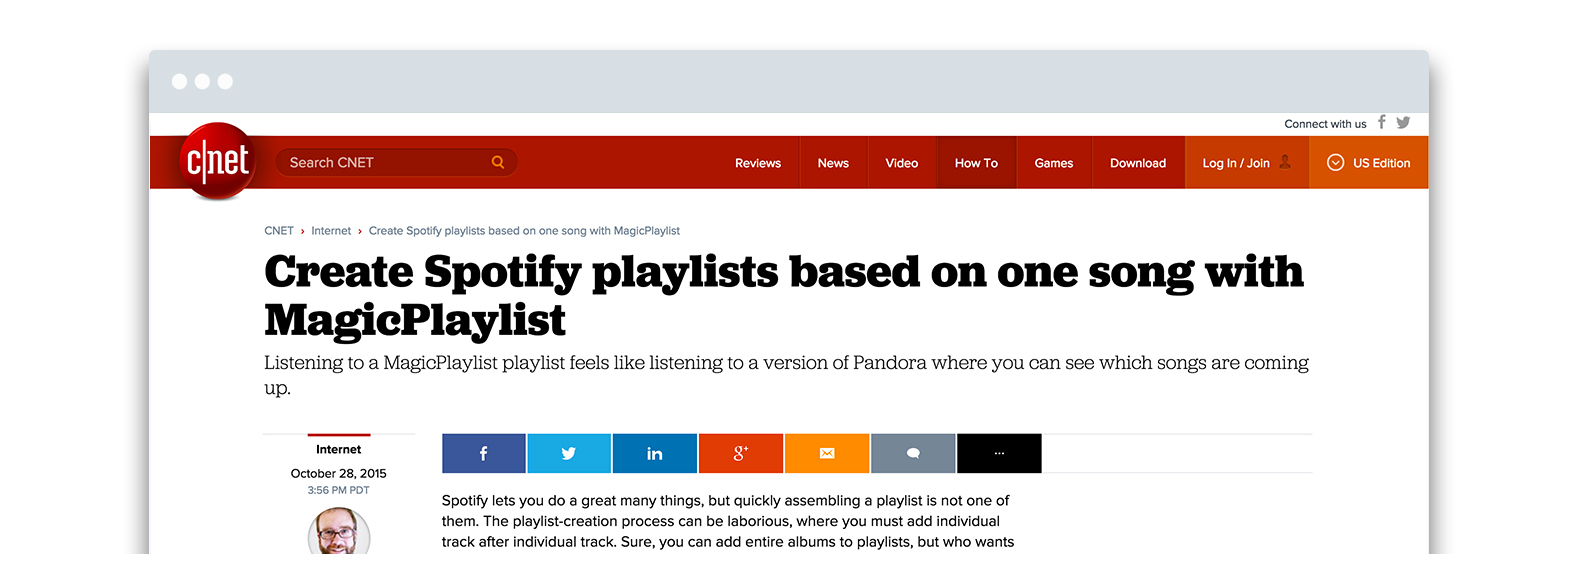 CNET - Create Spotify playlists based on one song with MagicPlaylist